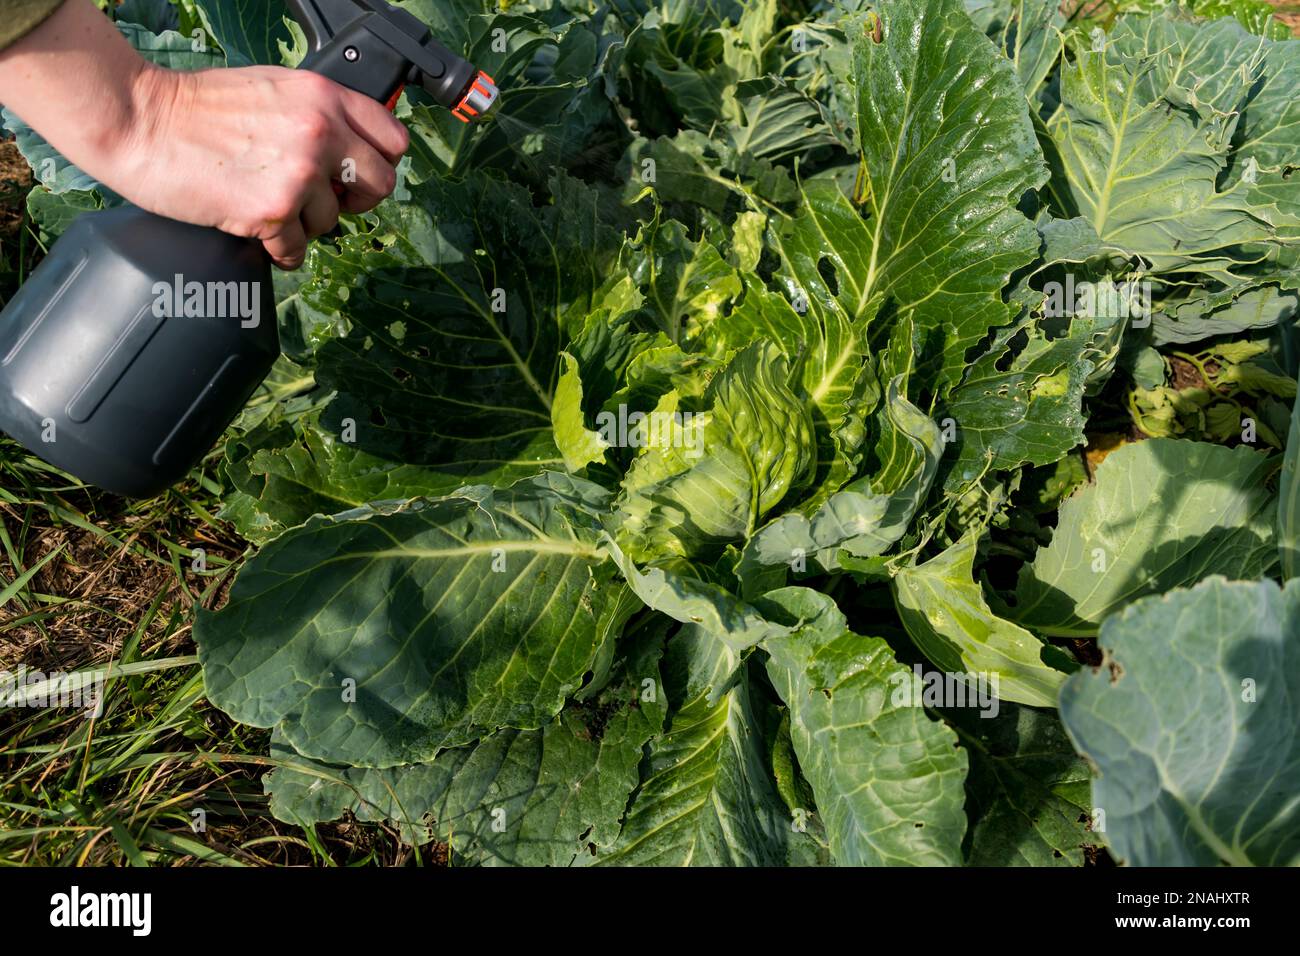 Natural cabbage treatment, spraying a natural mixture on the foliage to repel caterpillars and worms, pieris brassicae. Spray of nettle compost, cabba Stock Photo